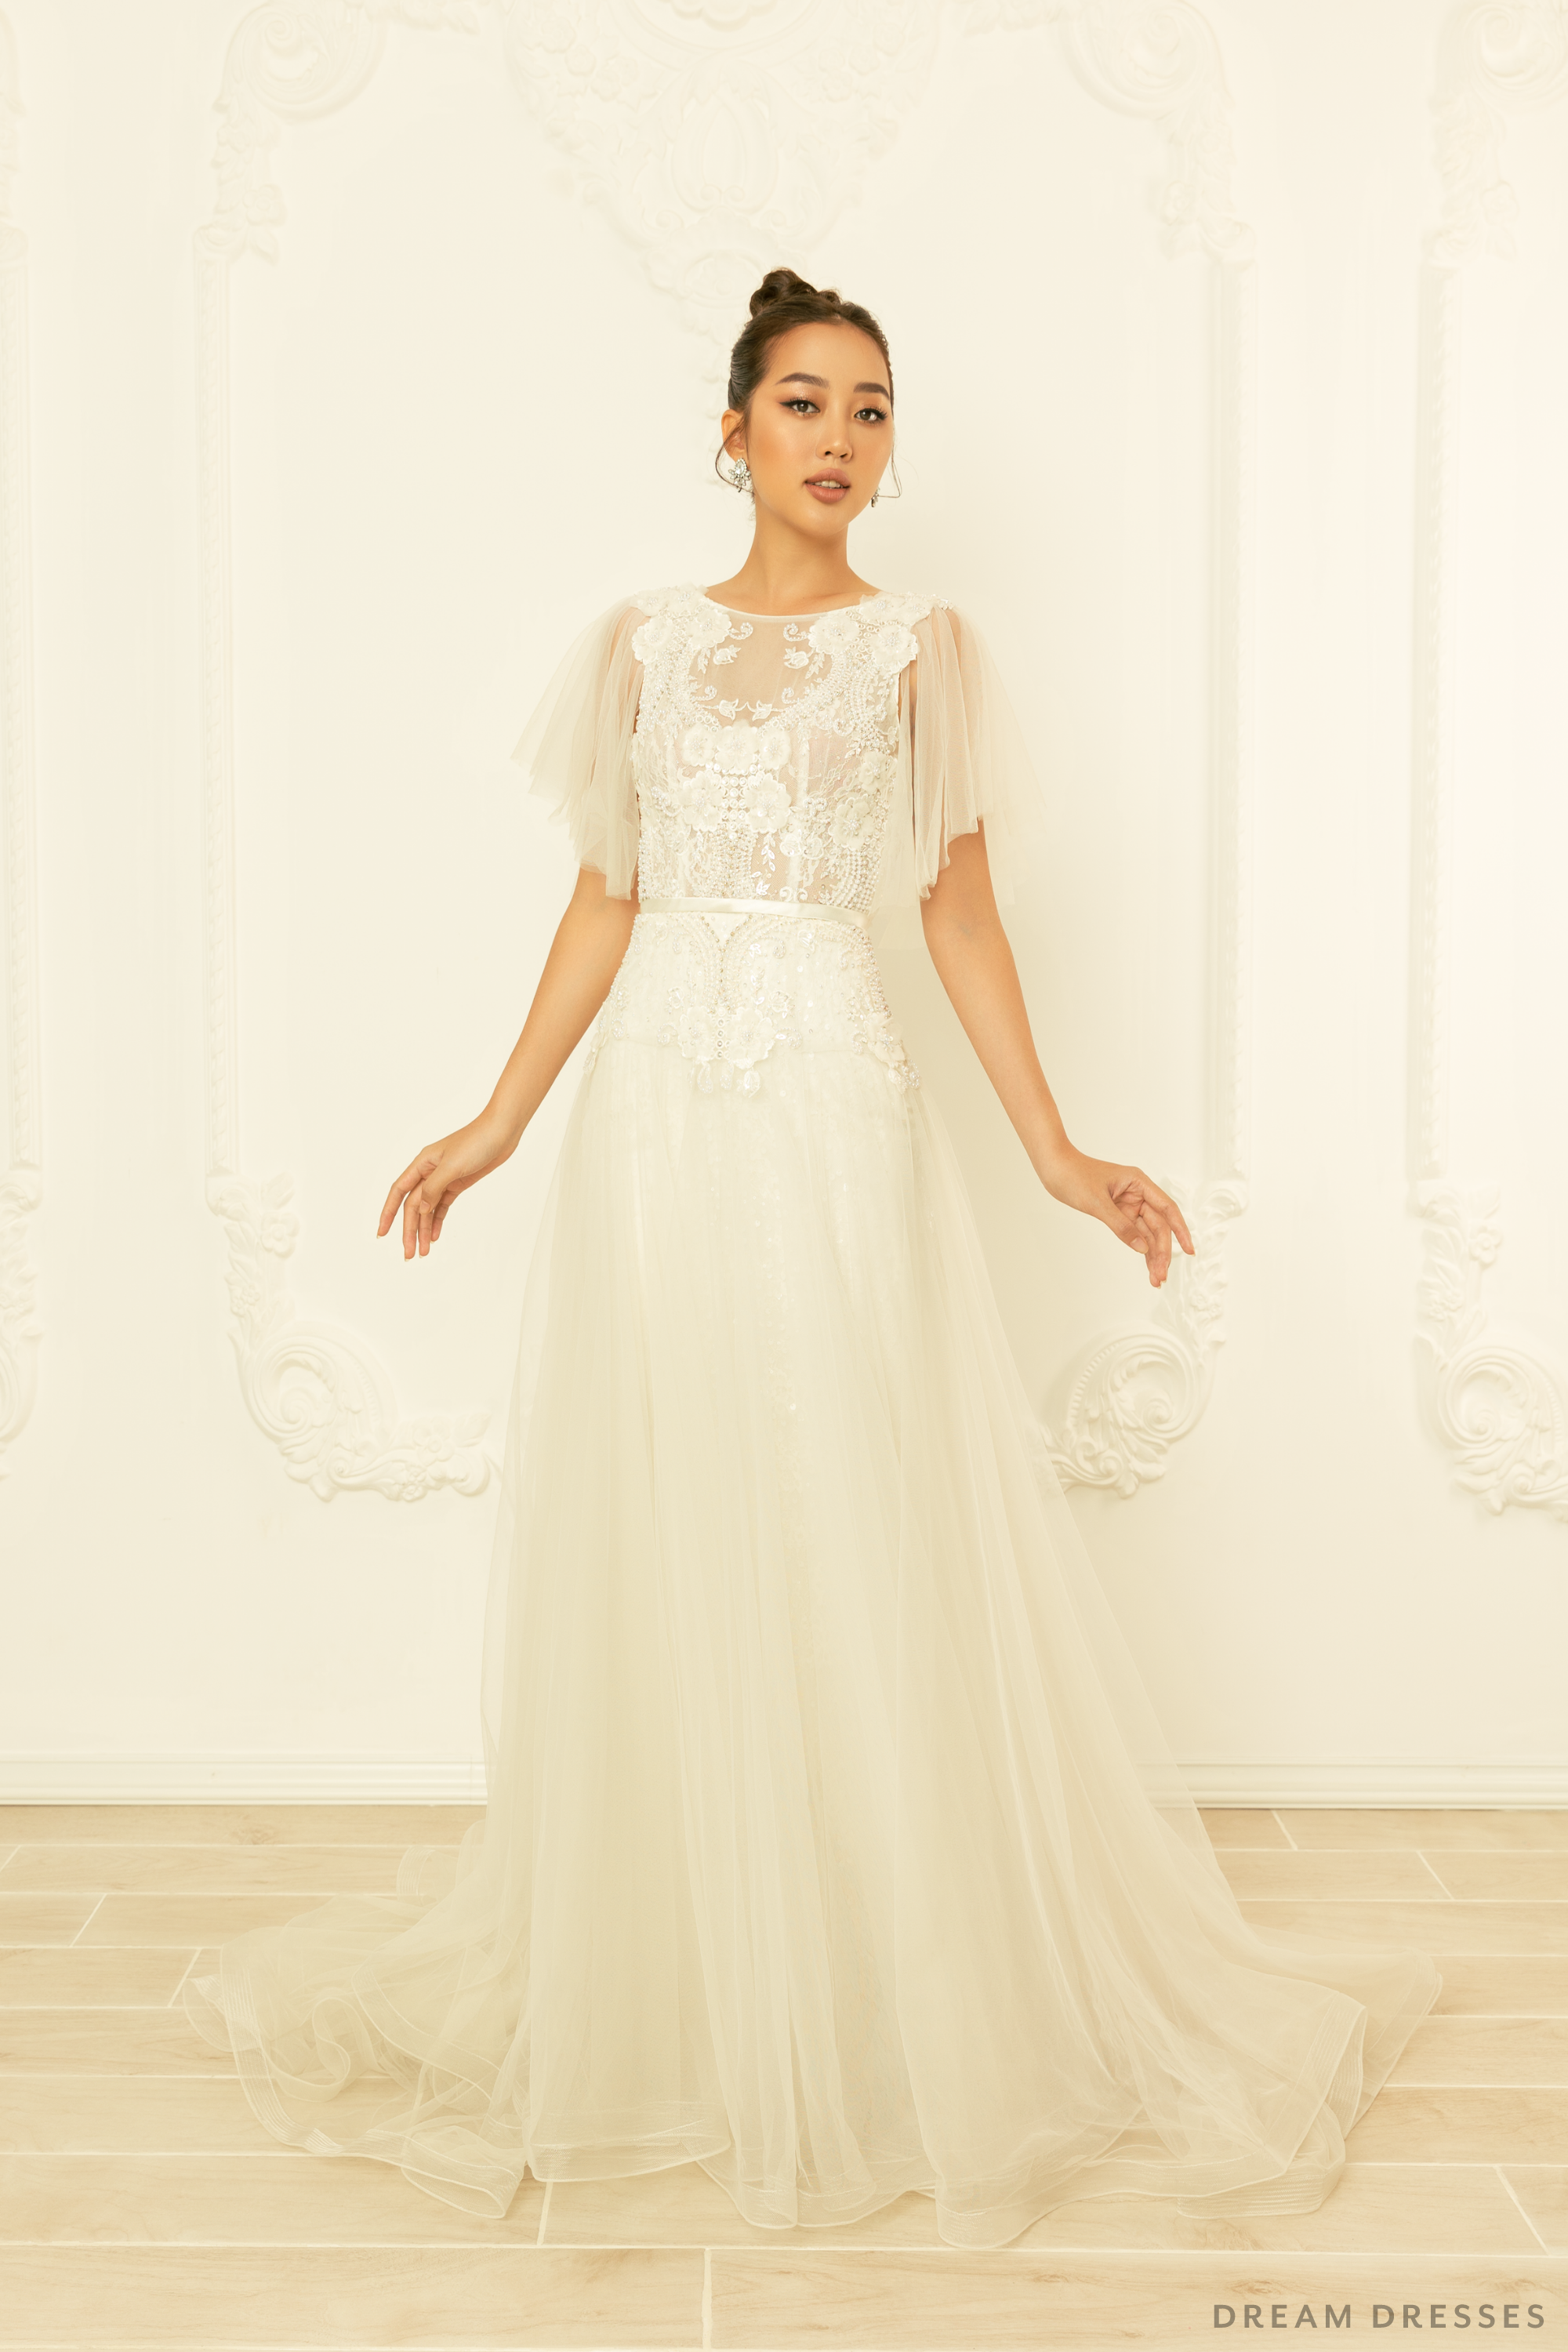 Tulle A-line Wedding Dress with Floral Lace (#NORAH)